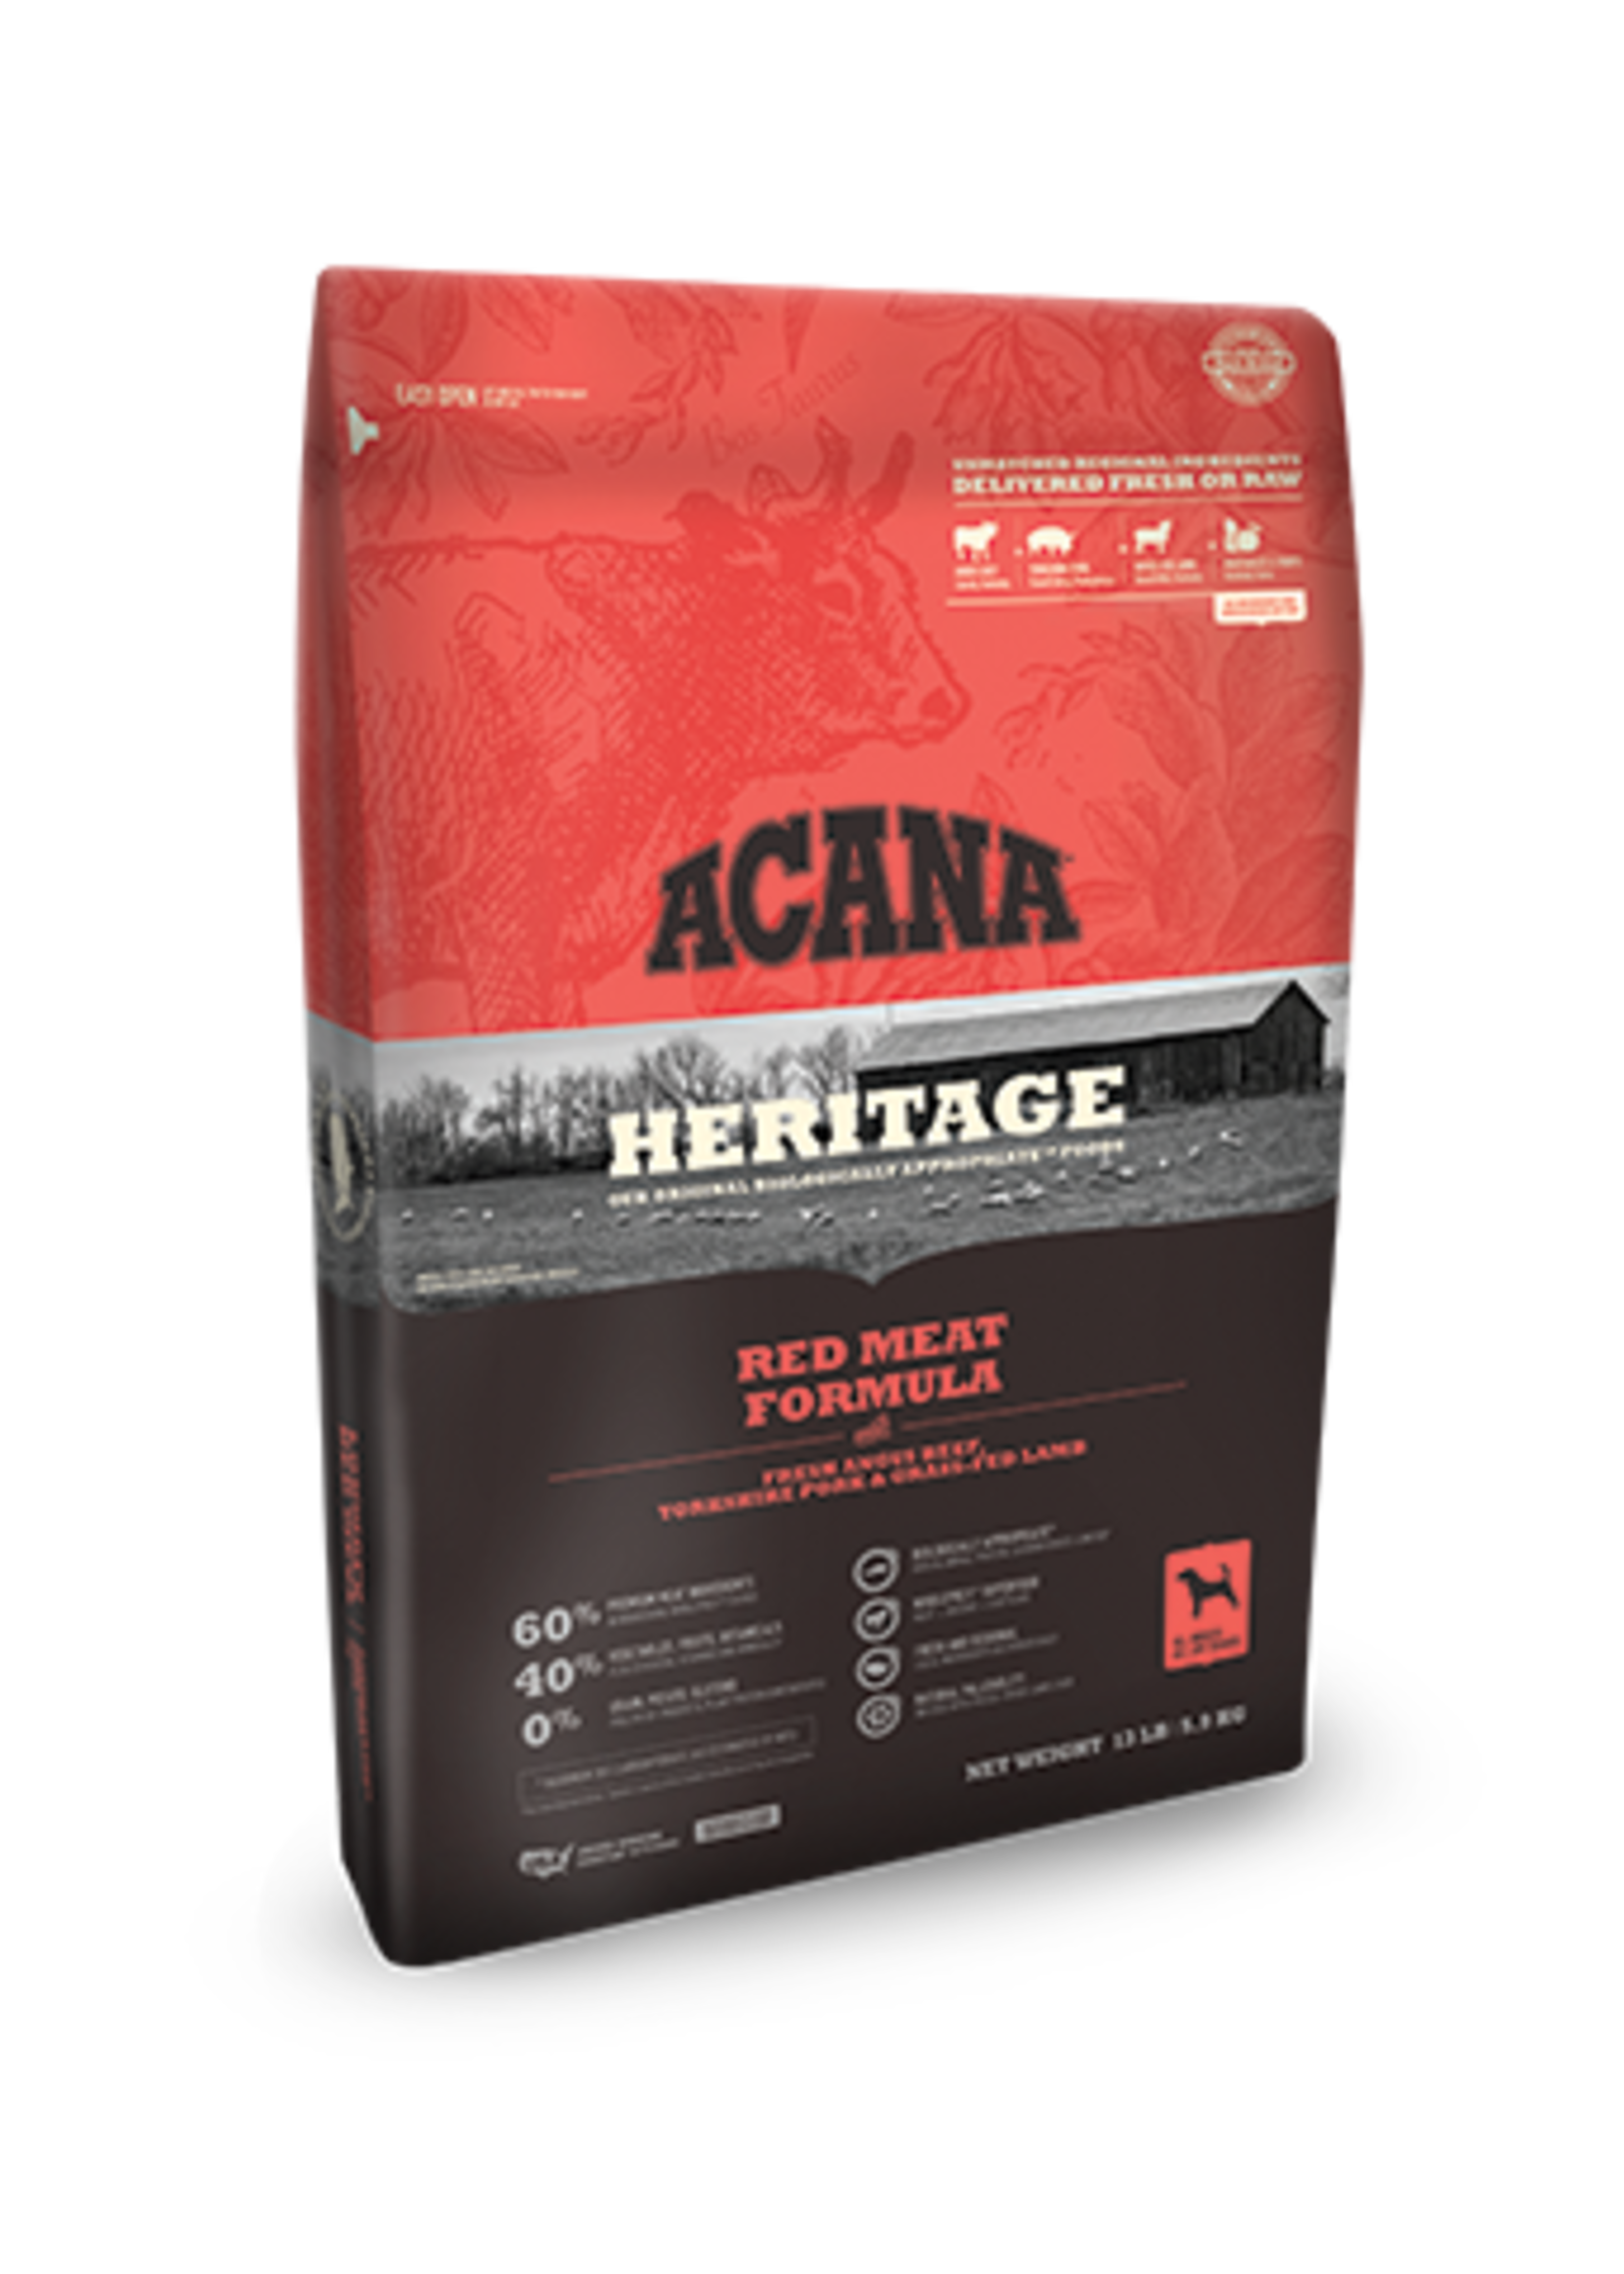 Acana Heritage Dog Food Red Meats